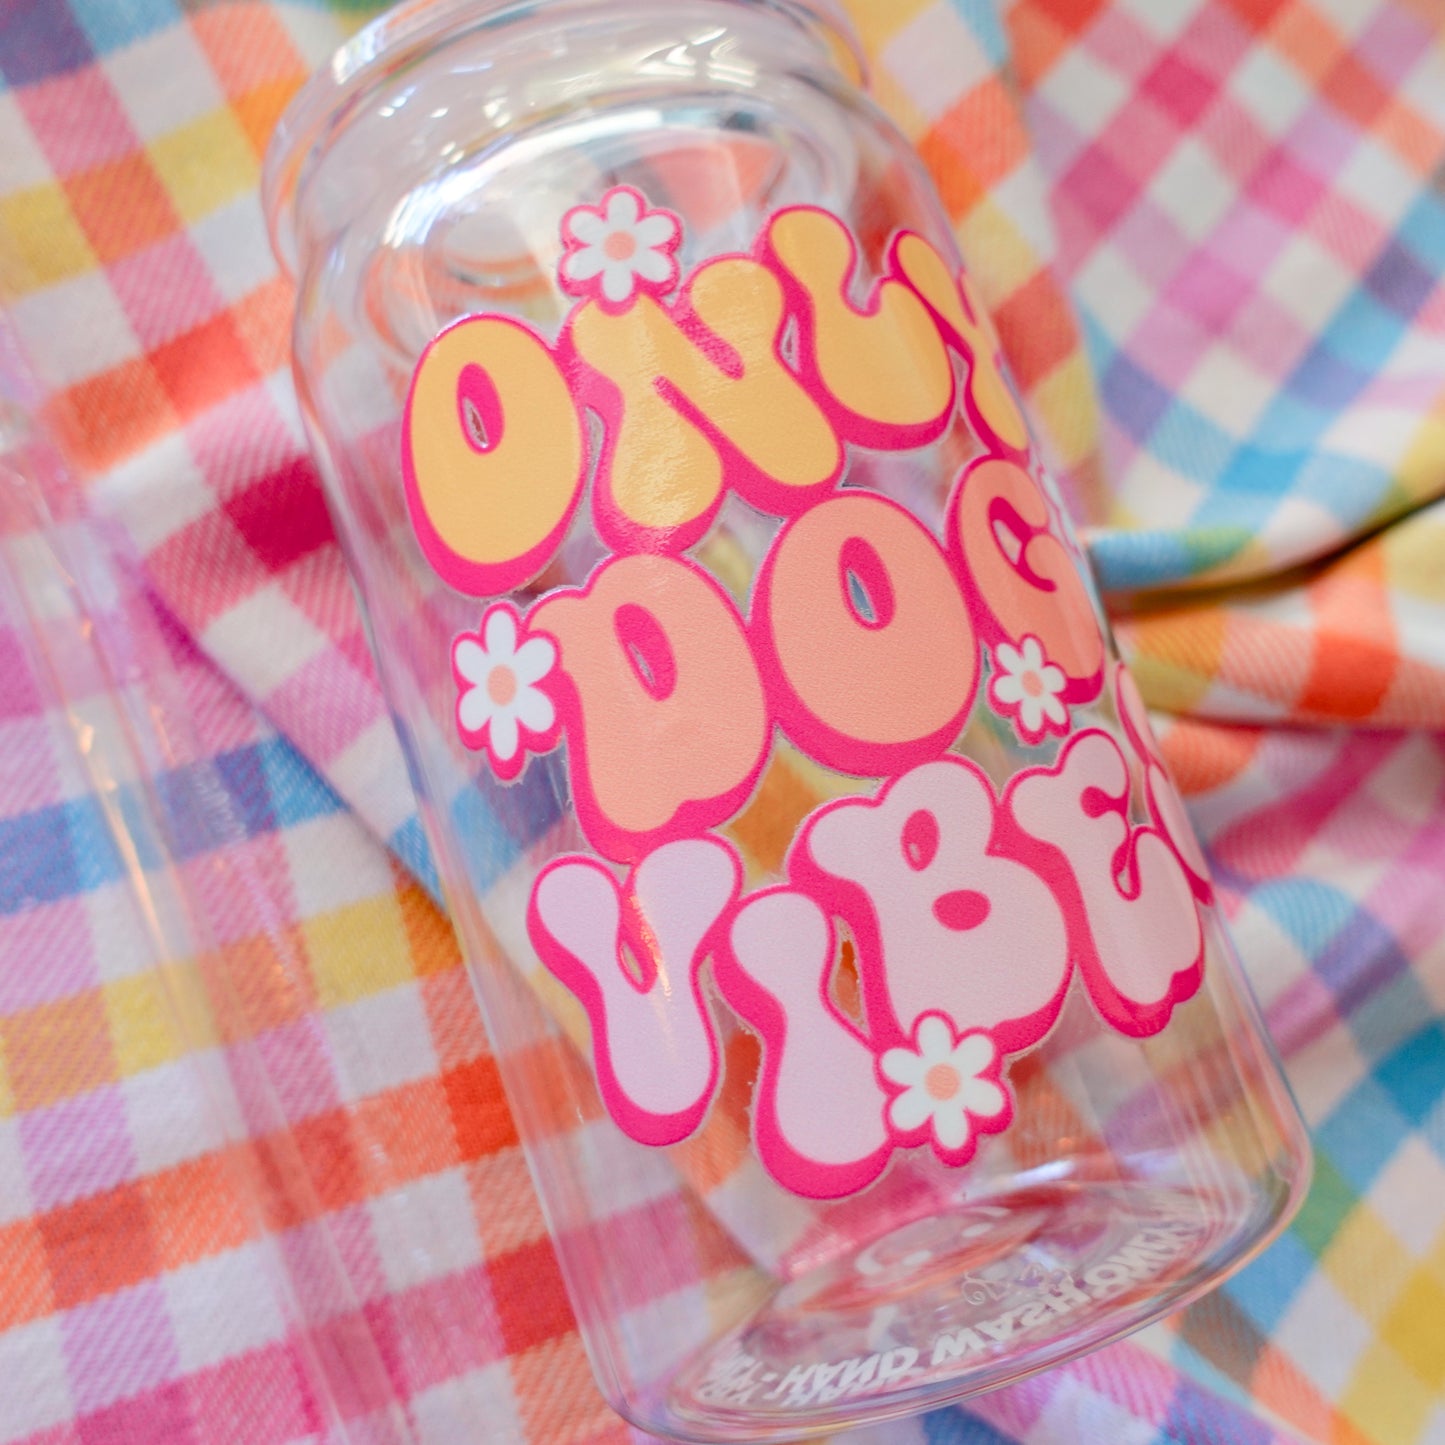 Only Dog Vibes - 16 oz Clear Cup w/Lid and Straw